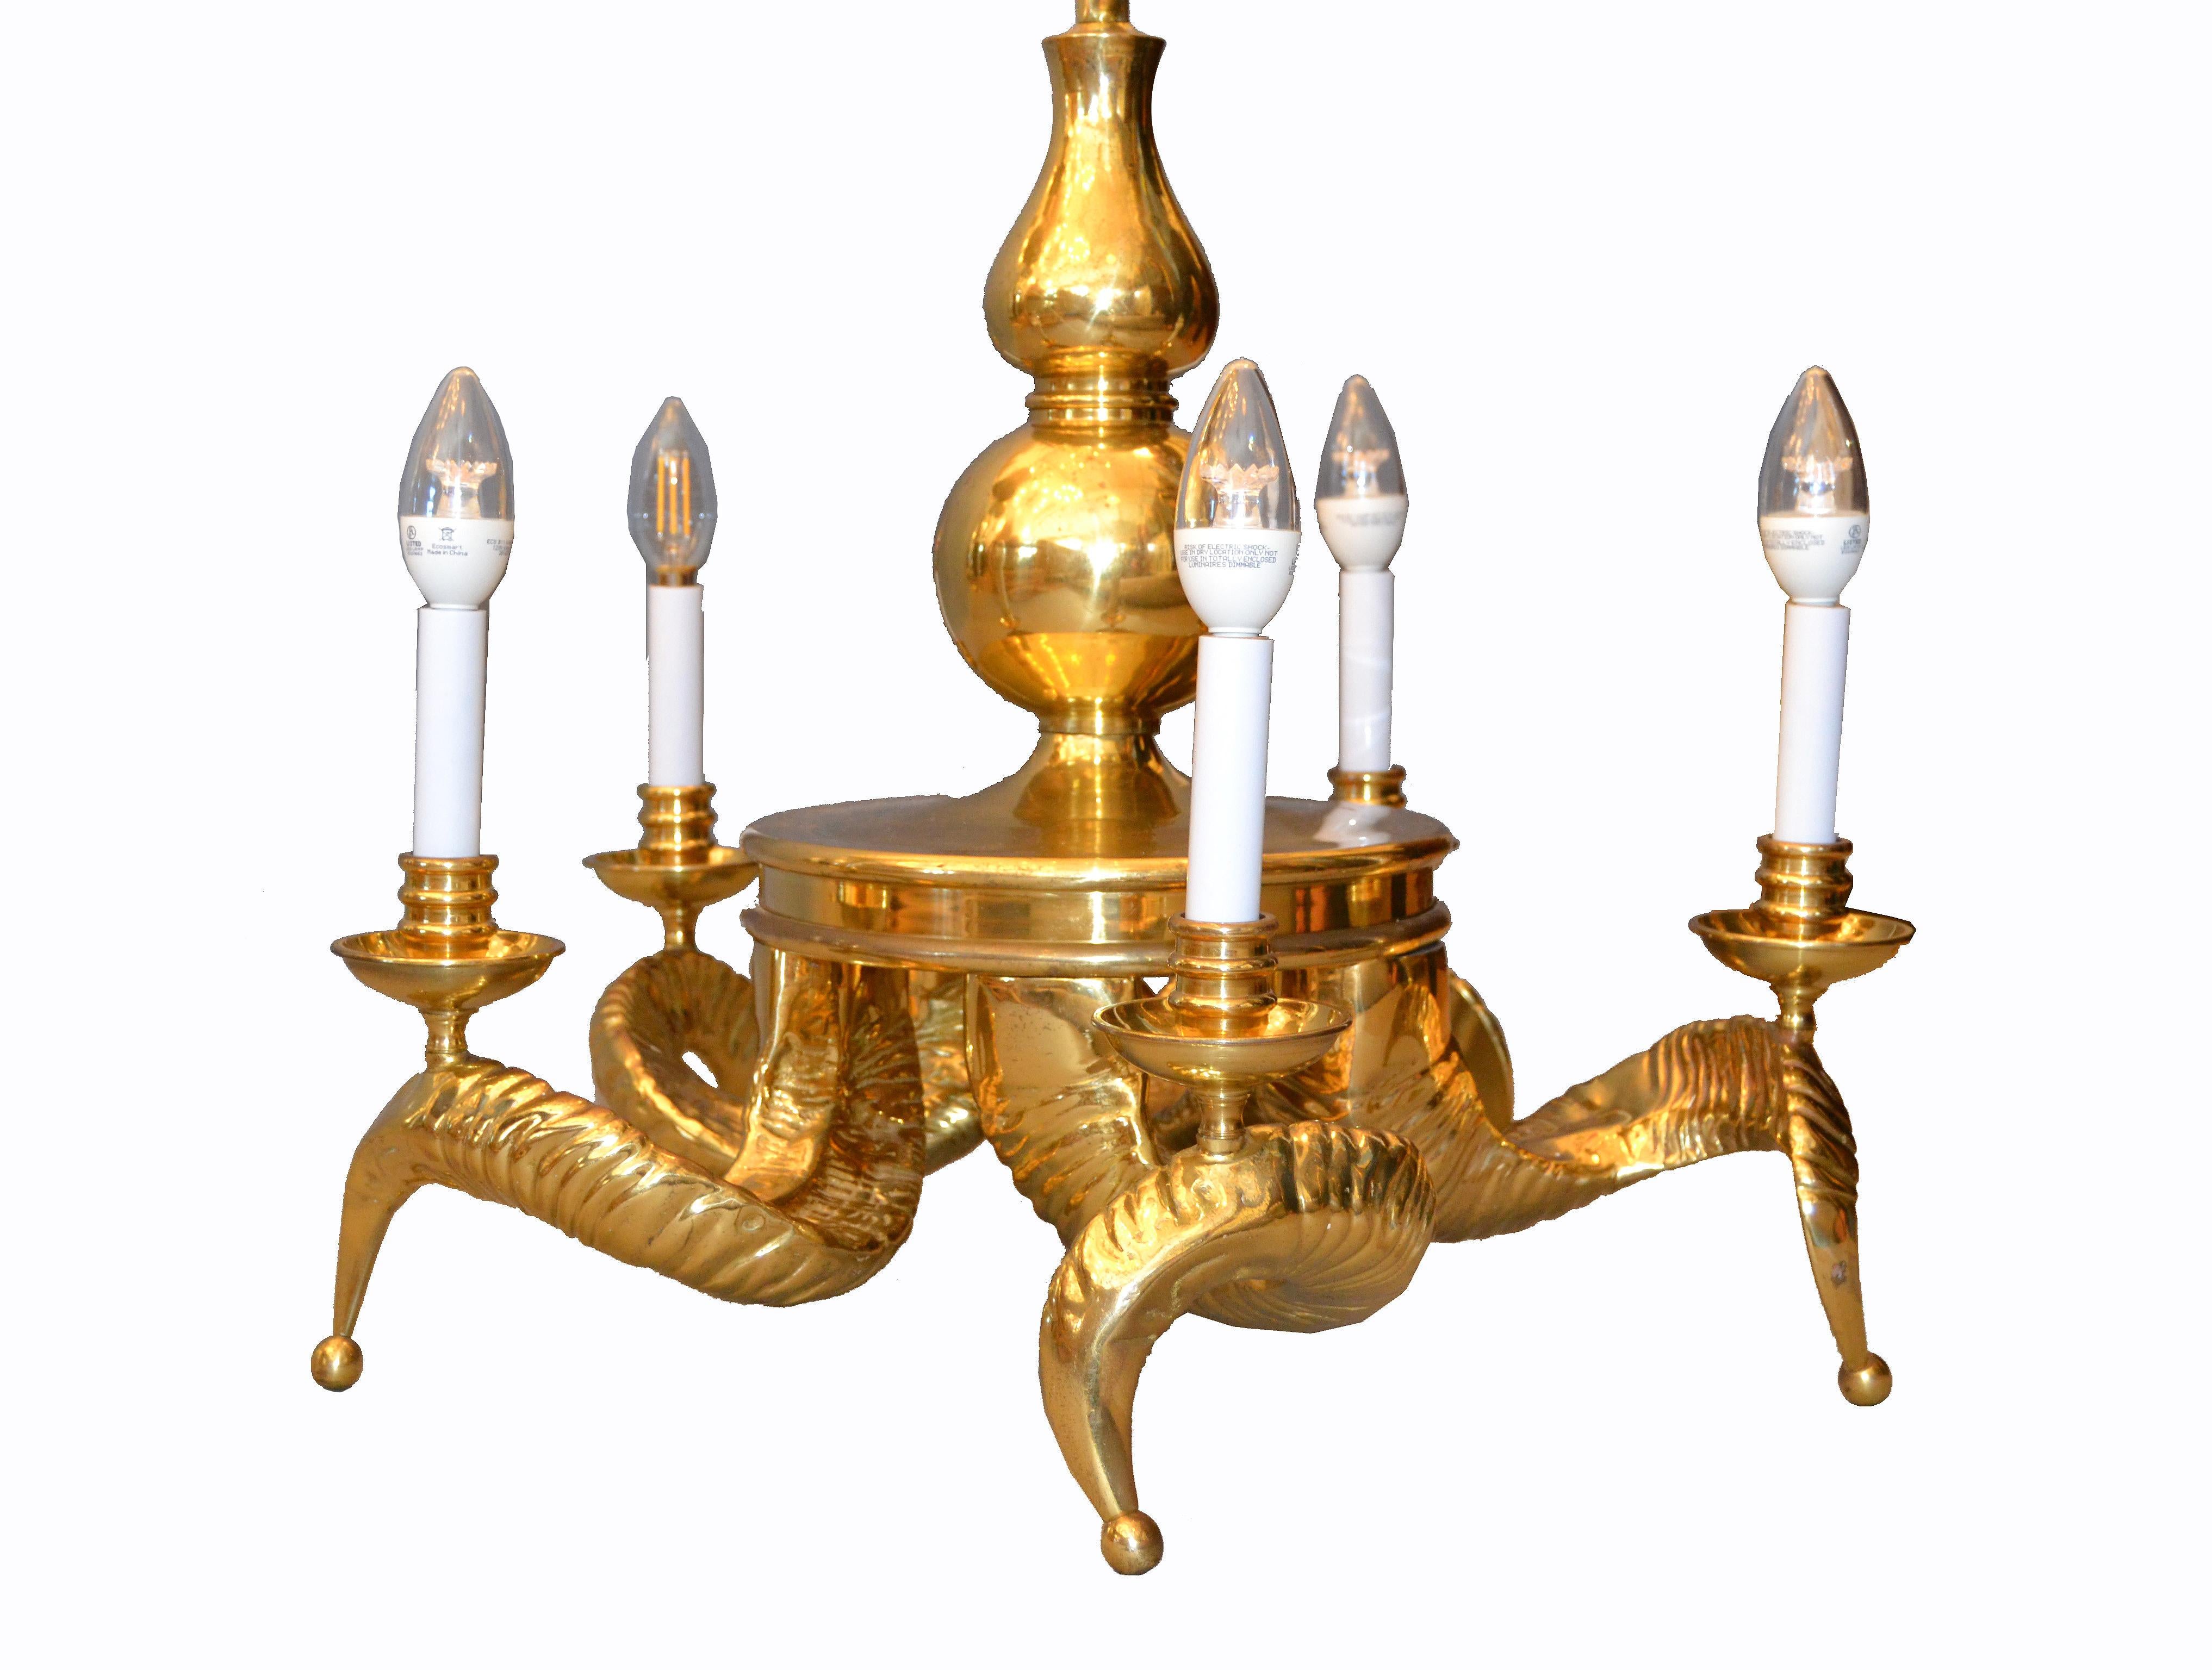 Hollywood Regency massive beautiful five-light bronze ram horns chandelier with exceptional detail from top to bottom.
This heavy bronze chandelier is in very good condition and shows age related patina.
It has been professionally rewired and